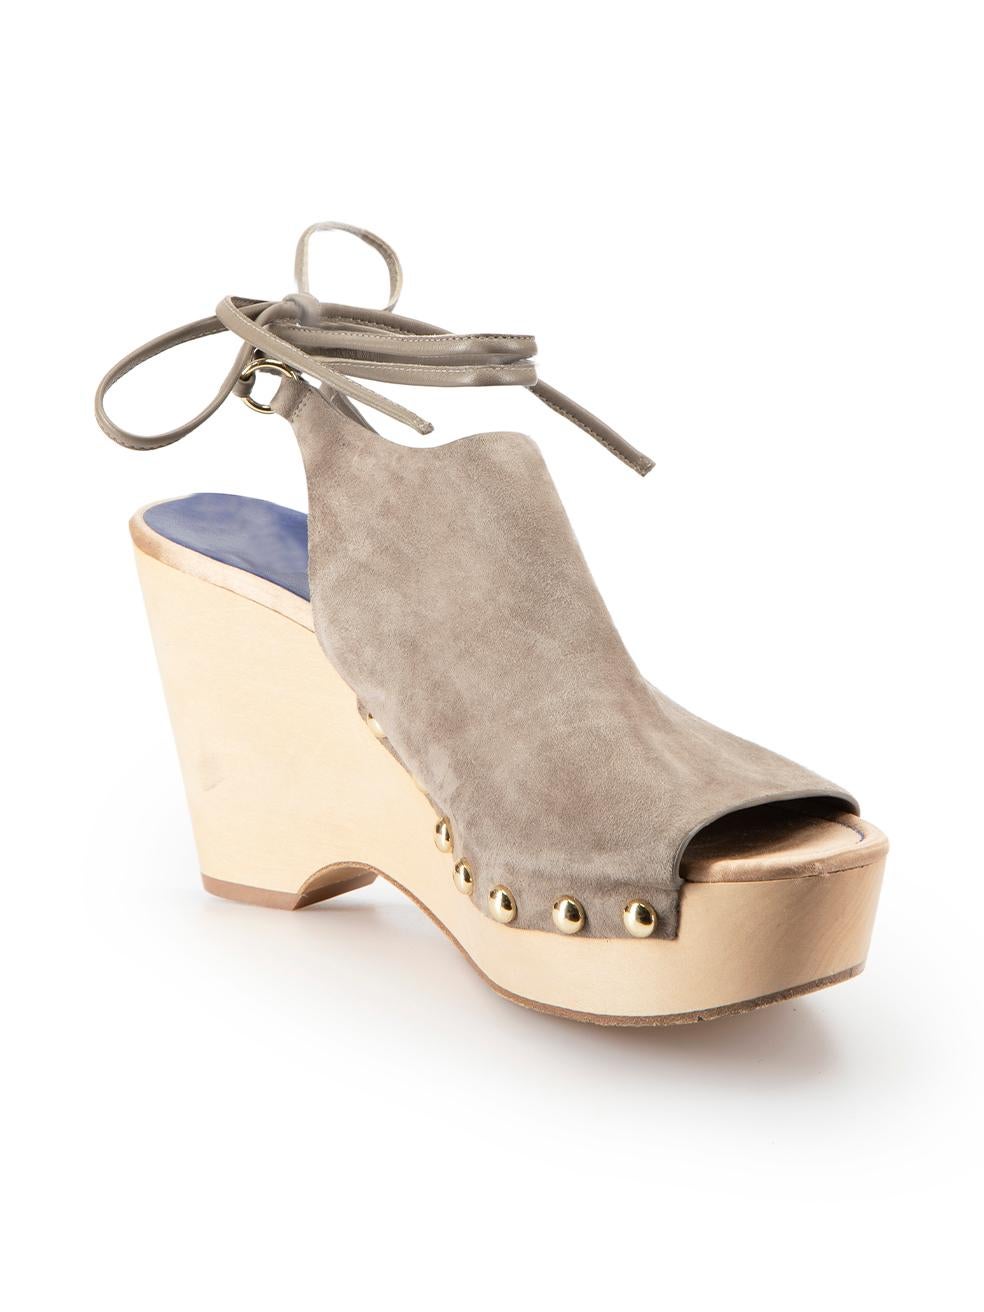 CONDITION is Very good. Minimal wear to shoes is evident. Minimal wear to both wedge heels with marks to the wood and scuffs to the metal studs on this used Diane Von Furstenberg designer resale item.



Details


Taupe

Suede

Sandals

Wooden